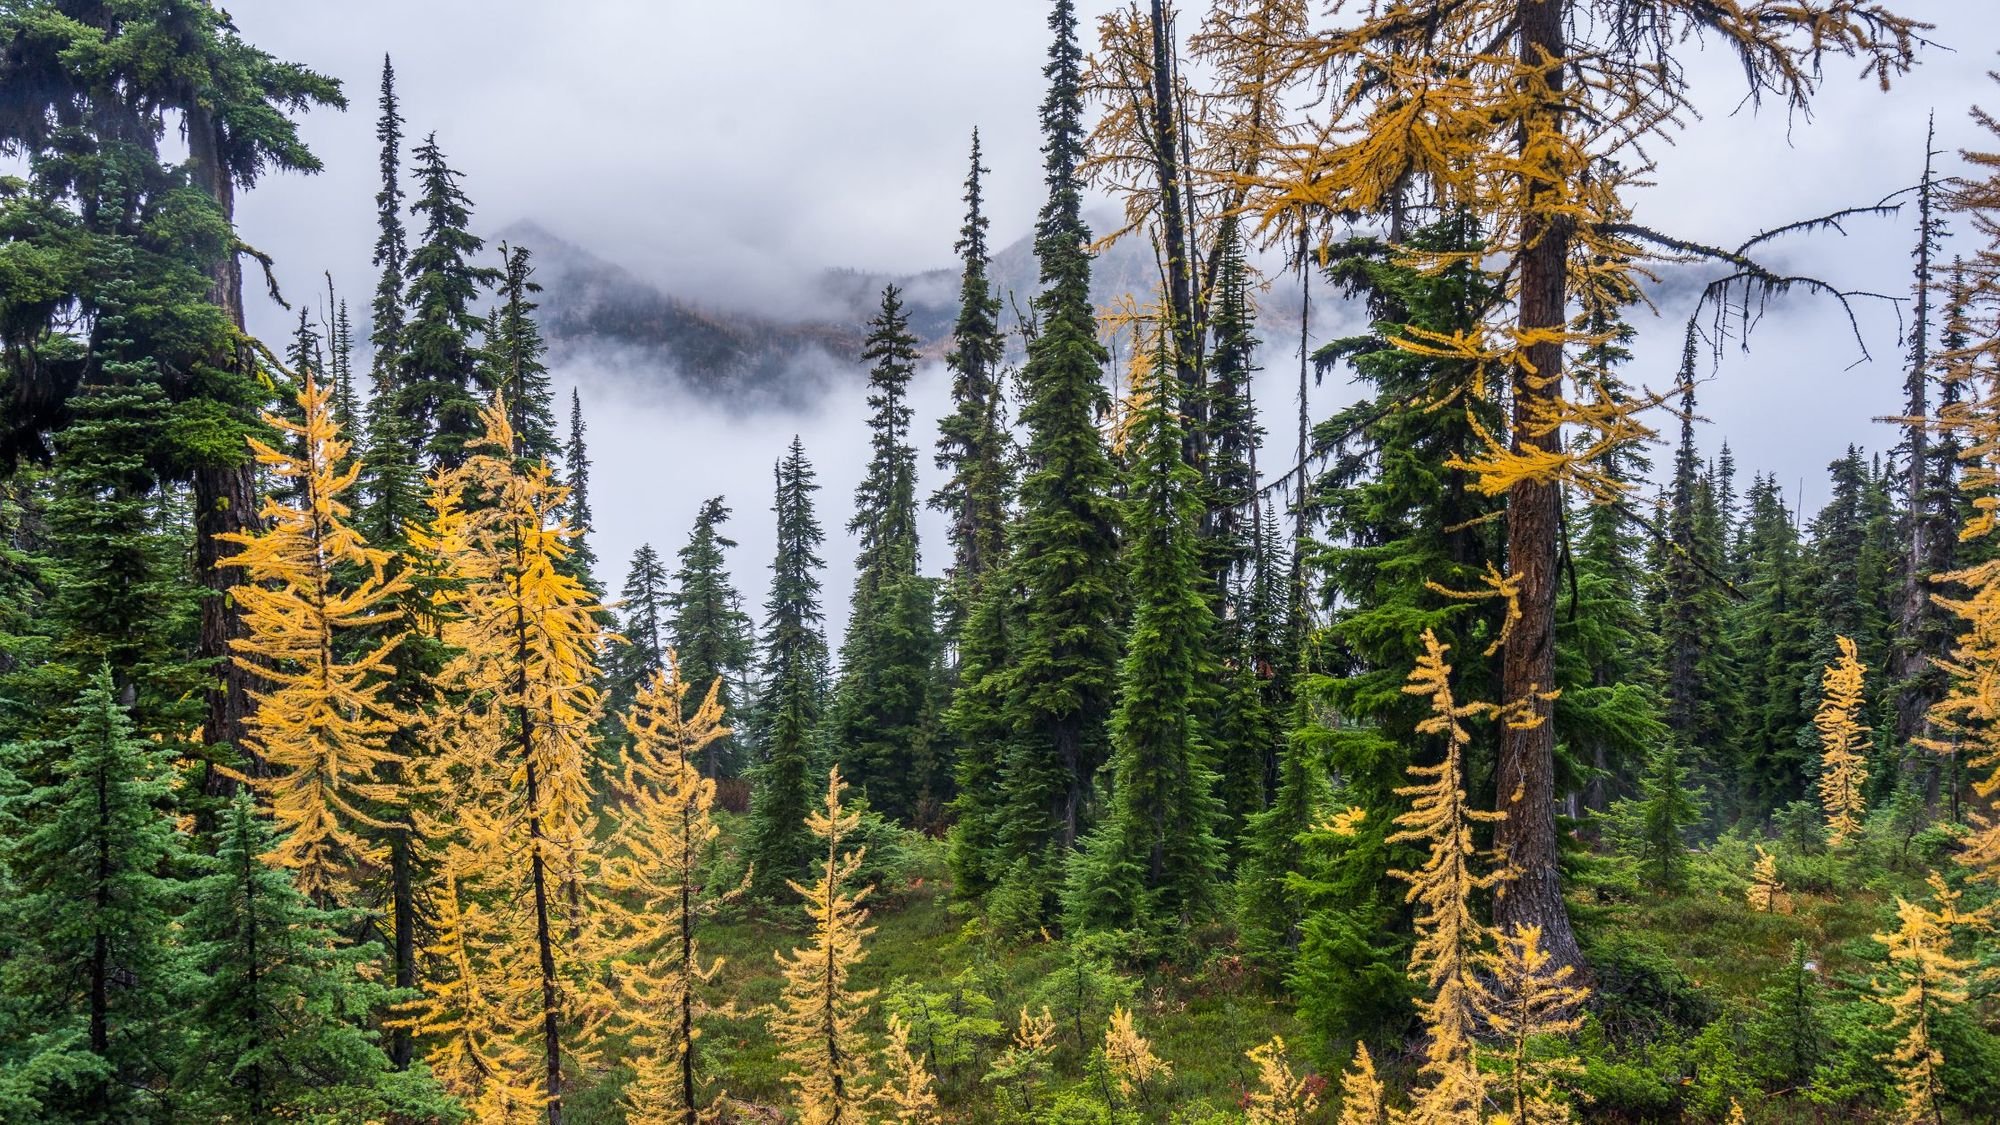 The types of spruce and fir forest you will climb through on your way to Kindersley Pass. Photo: Getty